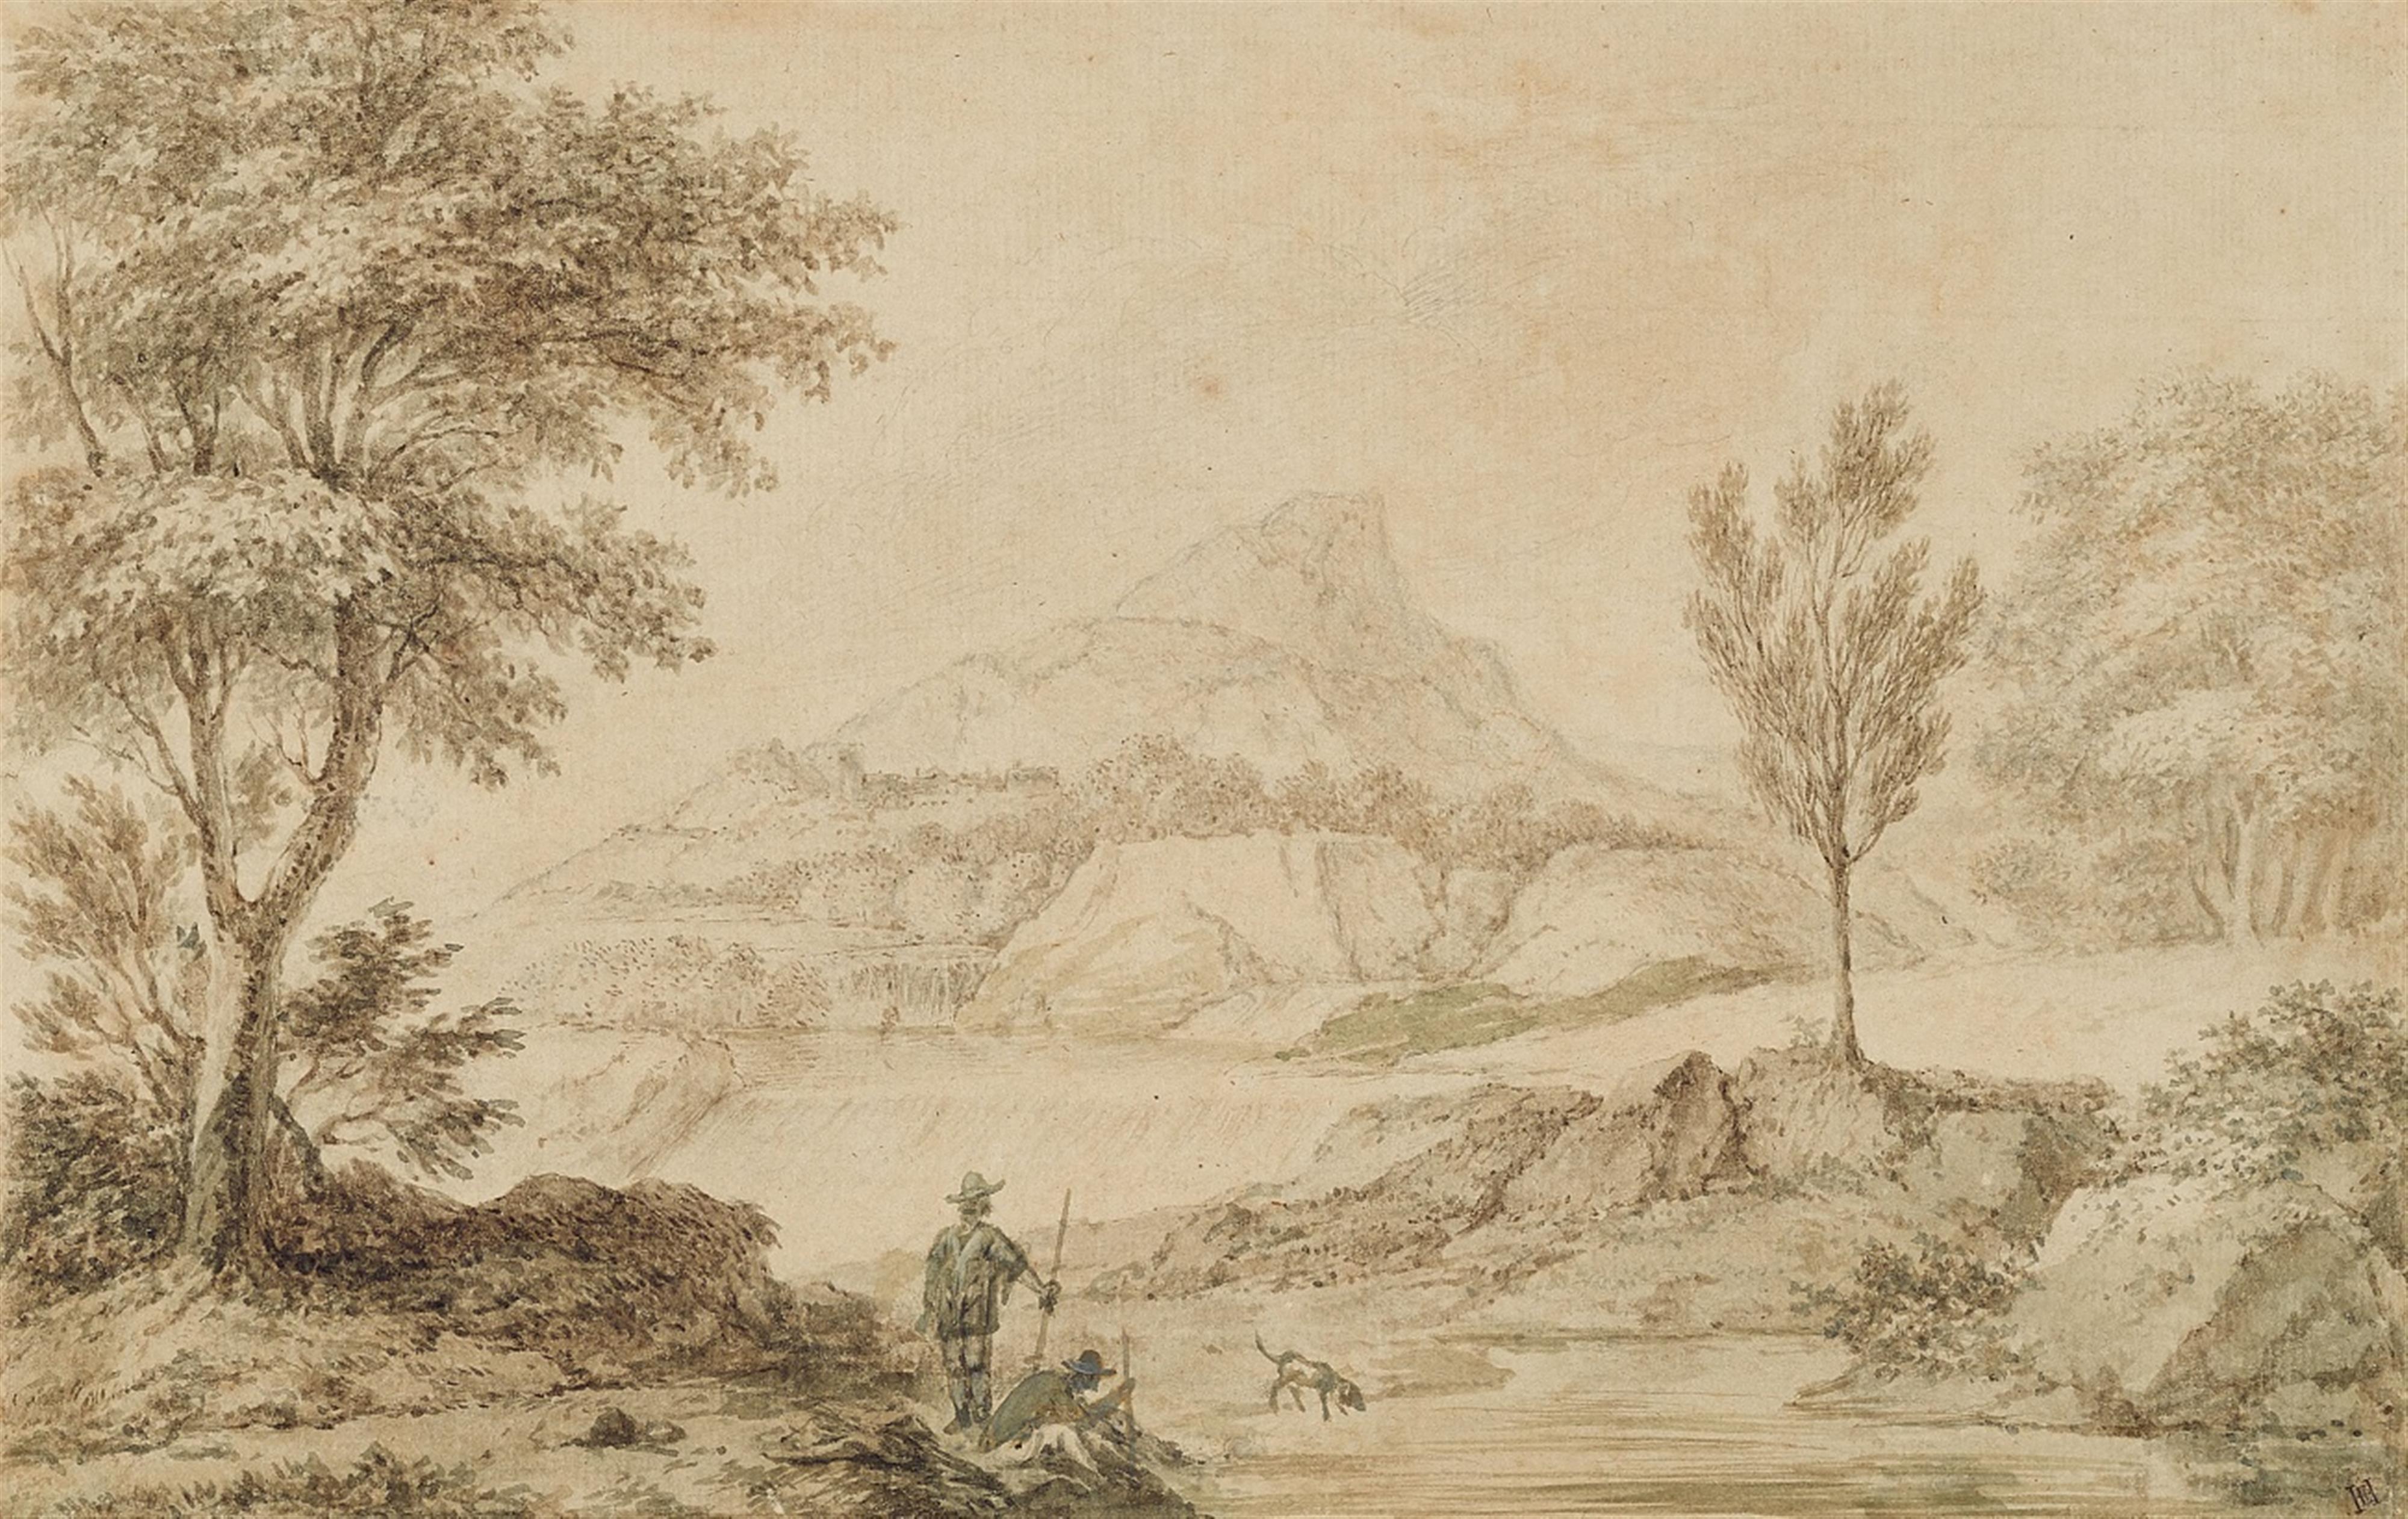 Herman van Swanevelt, attributed to - River Landscape with Two Travellers - image-1